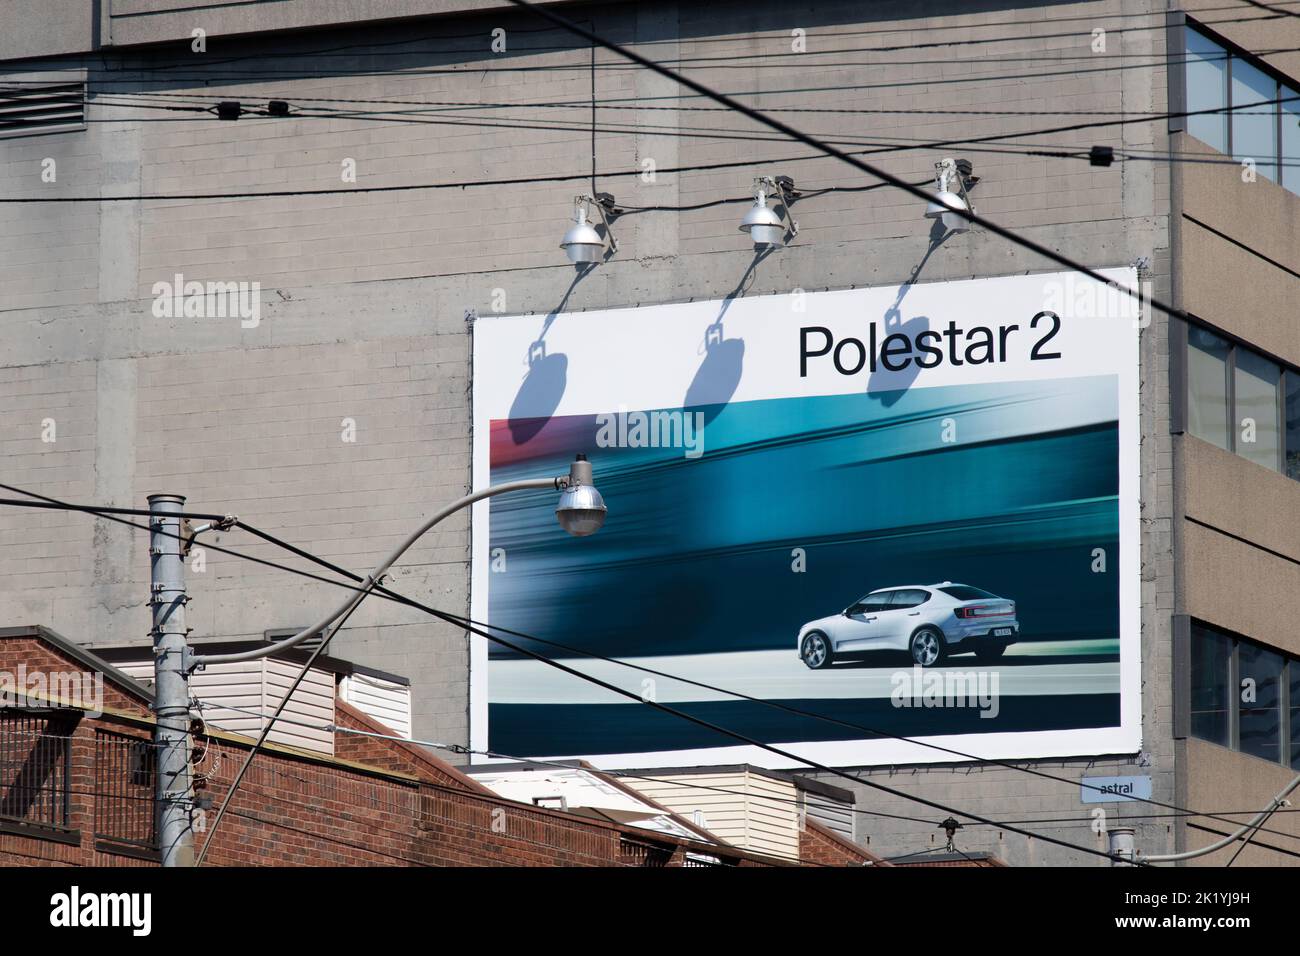 A Polestar 2 advertisement billboard is seen on a building in downtown Toronto; Polestar is a growing electric vehicle manufacturer owned by Volvo. Stock Photo